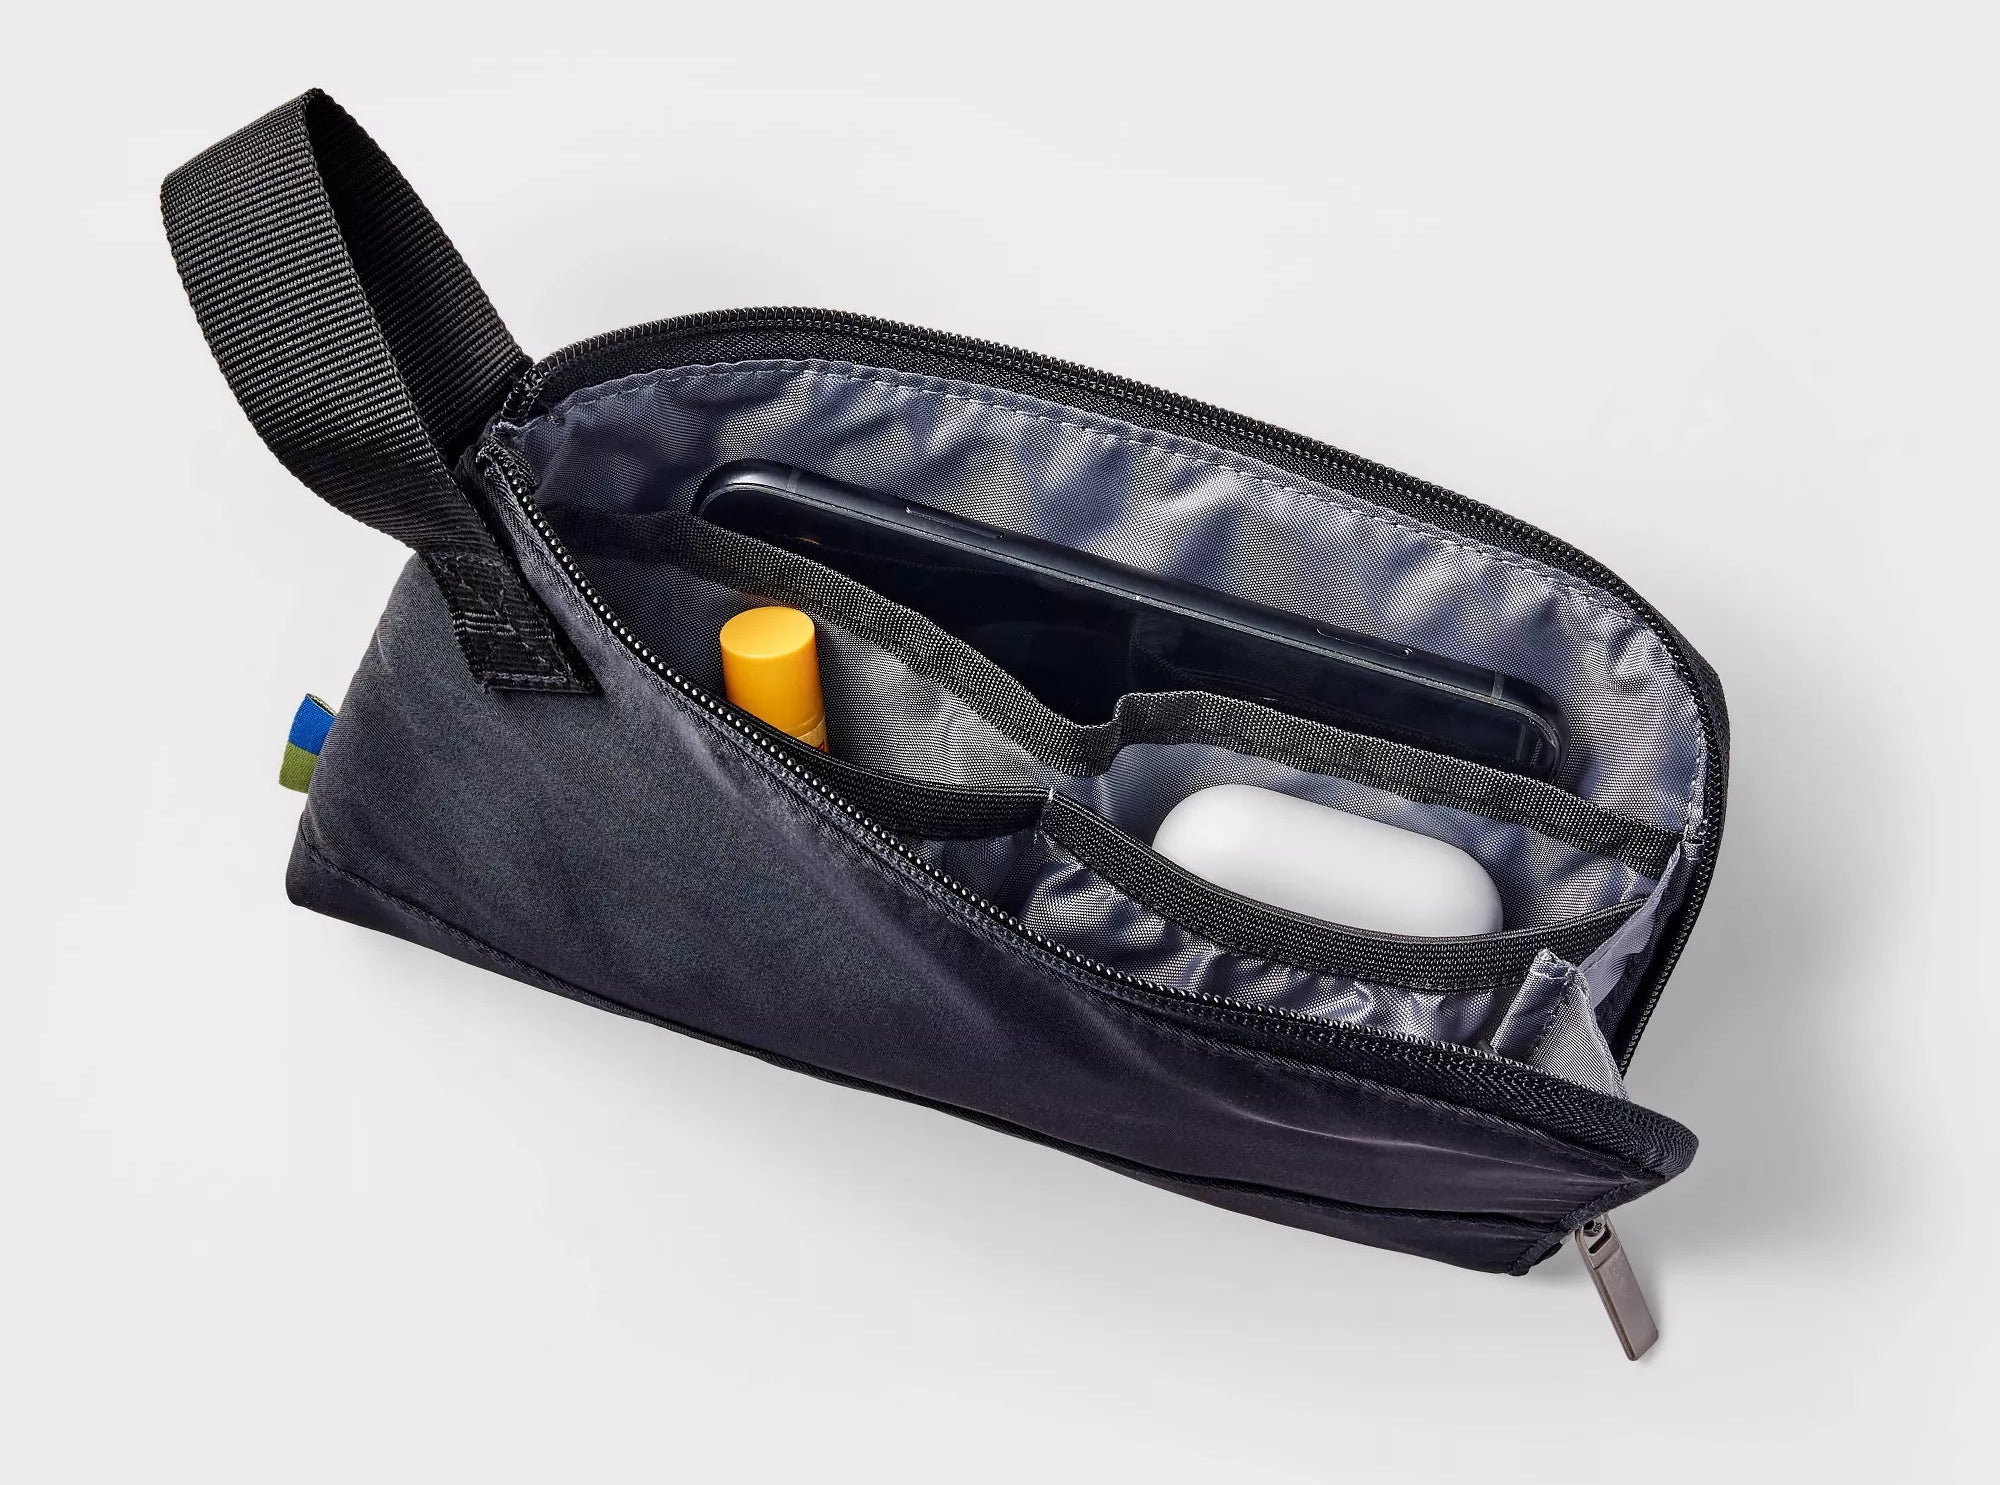 The black polyester fabric pouch with a single zippered compartment and multiple interior slip pockets